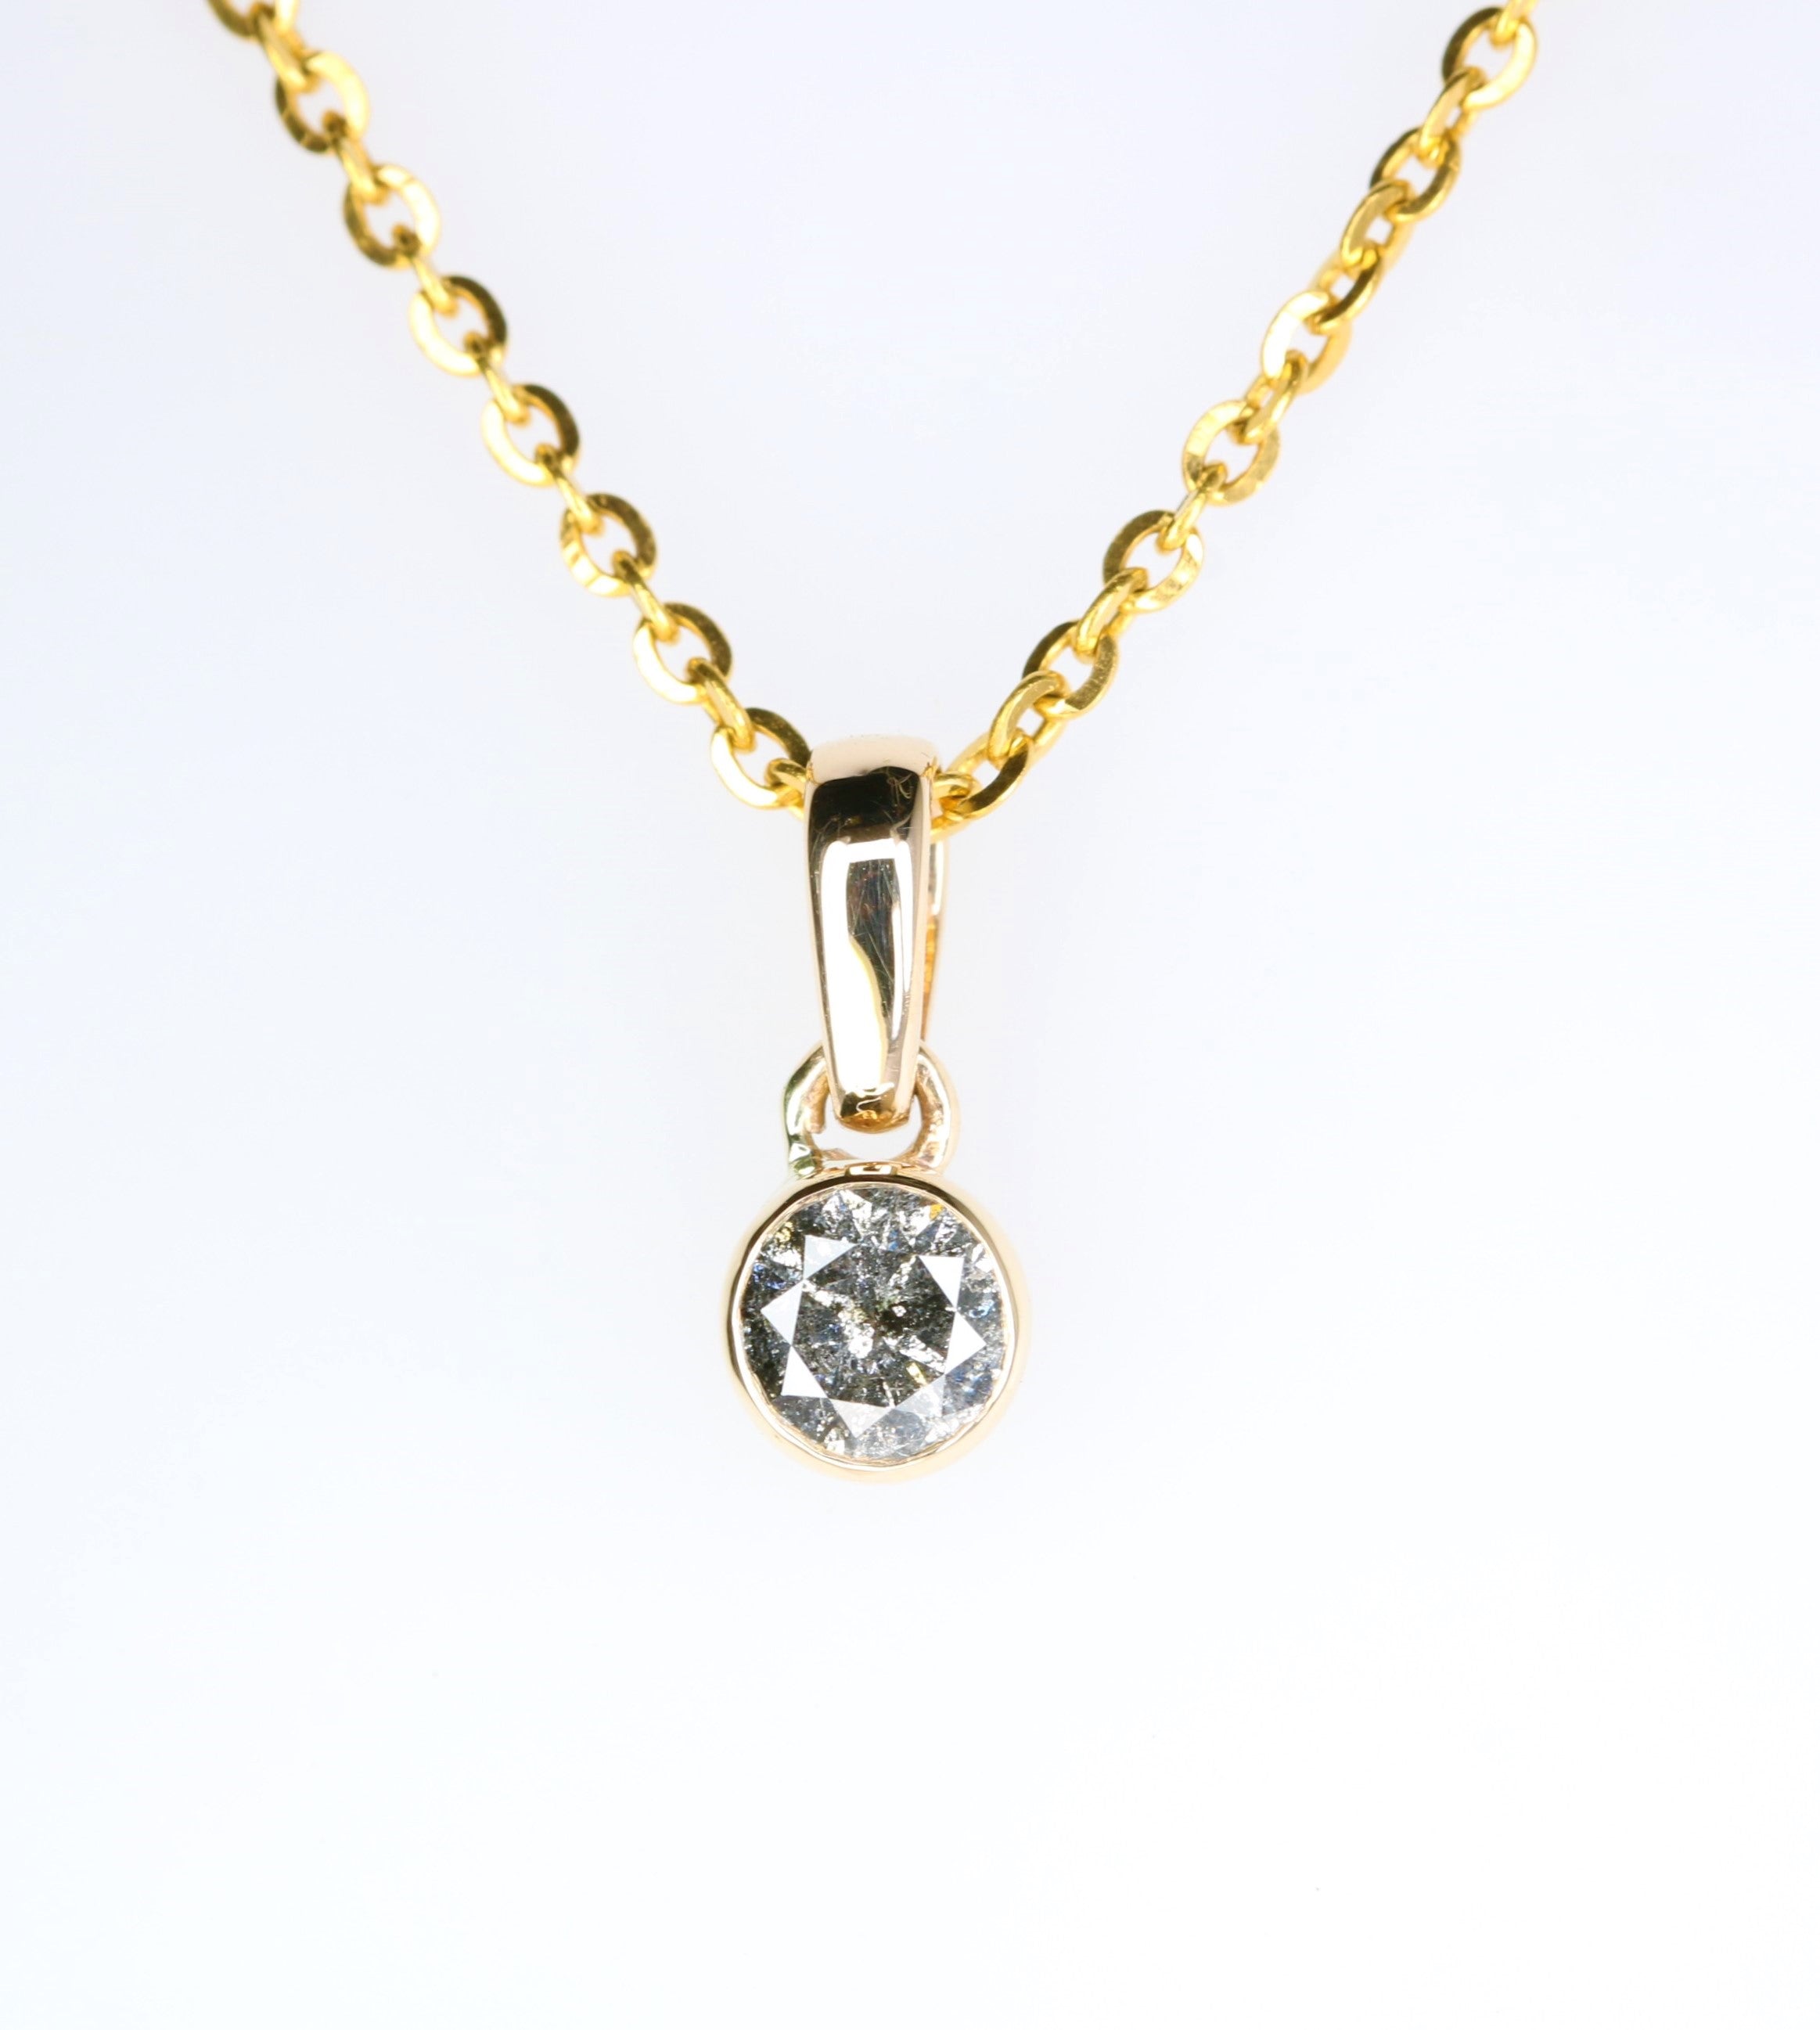 Salt And Pepper Round Brilliant Cut Diamond Pendant Bezel Setting With 10K Gold Chain Necklace For Women